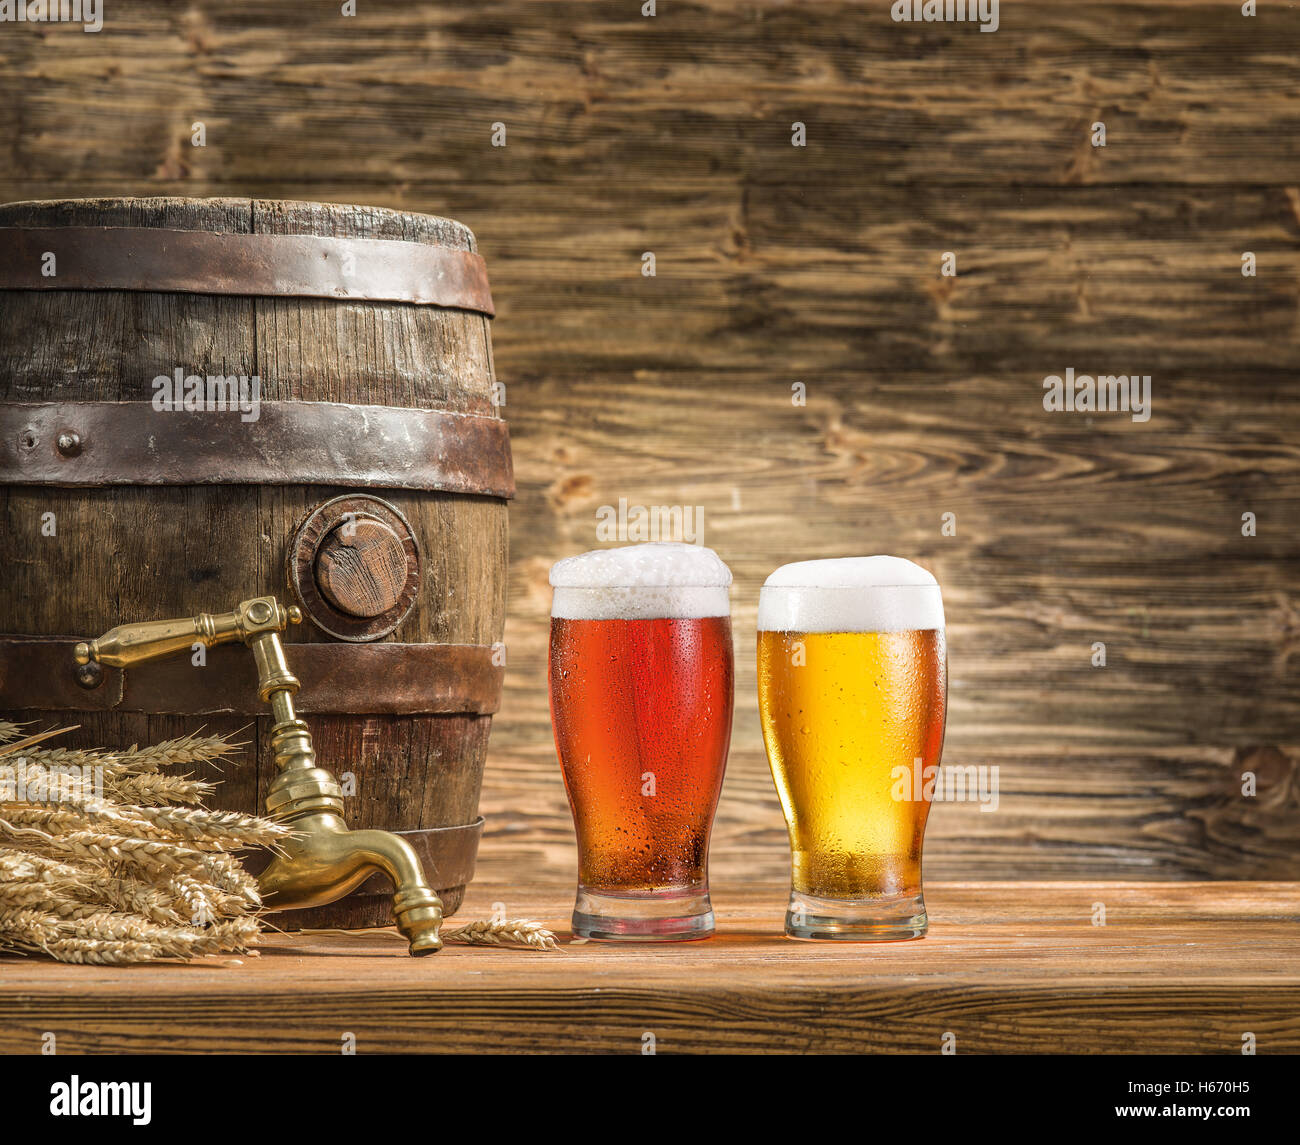 Glasses of  beer and ale barrel on the wooden table. Craft brewery. Stock Photo